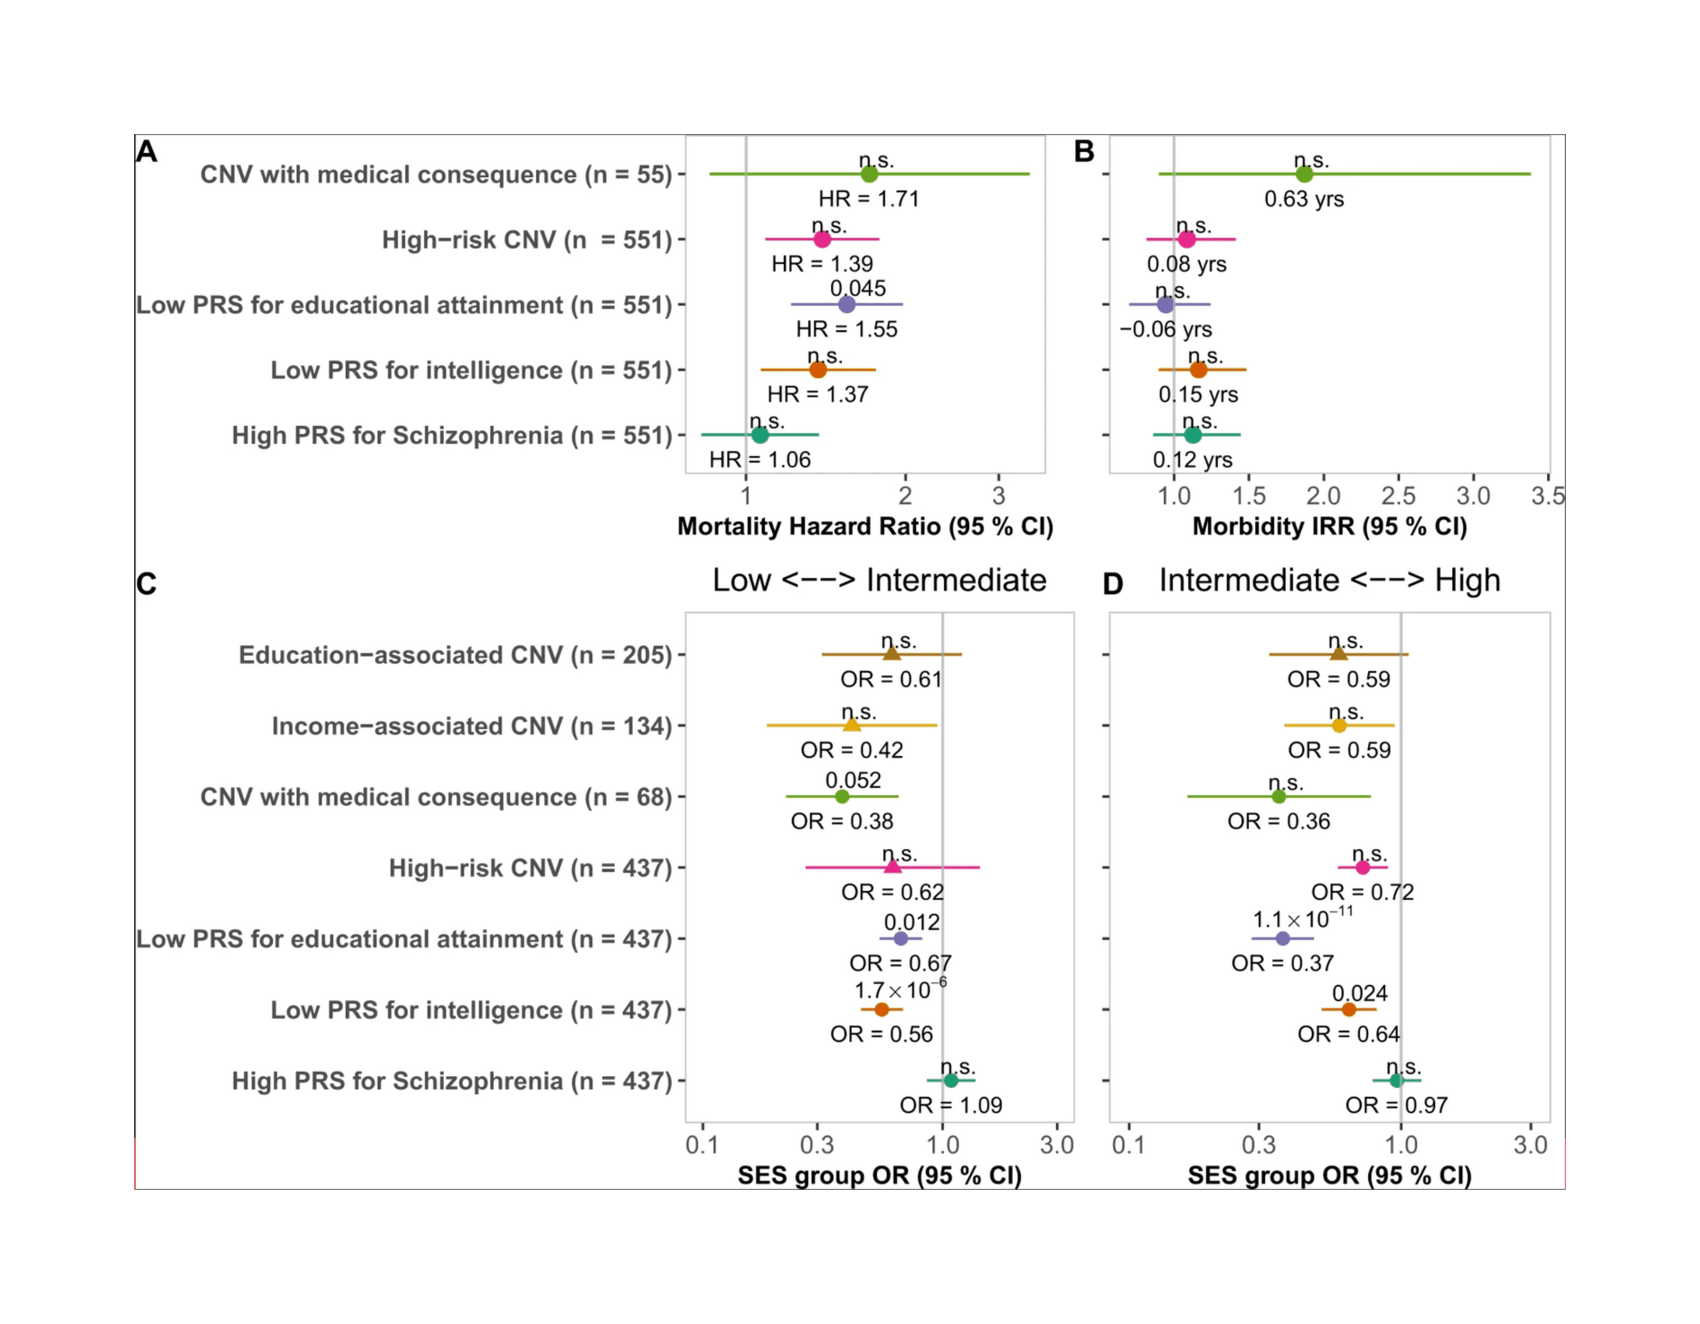 Figure 3: Health impact of high-risk CNVs and PRSs in Finnish cohorts: A: Hazard ratios in a Cox regression model for mortality in unaffected carriers of high-risk CNVs and individuals at the PRS extremes in FINRISK (n = 22,210). ID gene deletions are not pictured as there were no deaths during follow-up for carriers of this type of CNV. B: Incidence rate ratio (IRR) of high-risk CNVs and PRS extremes in a Poisson regression model of the Charlson comorbidity index (CCI) in FINRISK individuals with no SNPD (n = 22,210). The incidence of one CCI unit was more than 3.5 higher in ID gene deletion carriers than in individuals with no high-risk CNV. C, D: Impact of CNVs and PRS outlier status on socioeconomic status and health. The odds of low SES and poor health were highest for individuals with low PRSIQ, and to a lesser extent for individuals at the lowest extreme of PRSEA (A). The odds of high SES and good health was lowest for individuals at the lowest extreme of PRSEA, and to a lesser extent for individuals at the lowest extreme of PRSIQ (B). Effects meta-analyzed using a random-effects assumption are denoted by triangles, otherwise, a fixed-effect assumption was made. The Bonferroni-adjusted p-value is denoted above the point estimate of each variant.